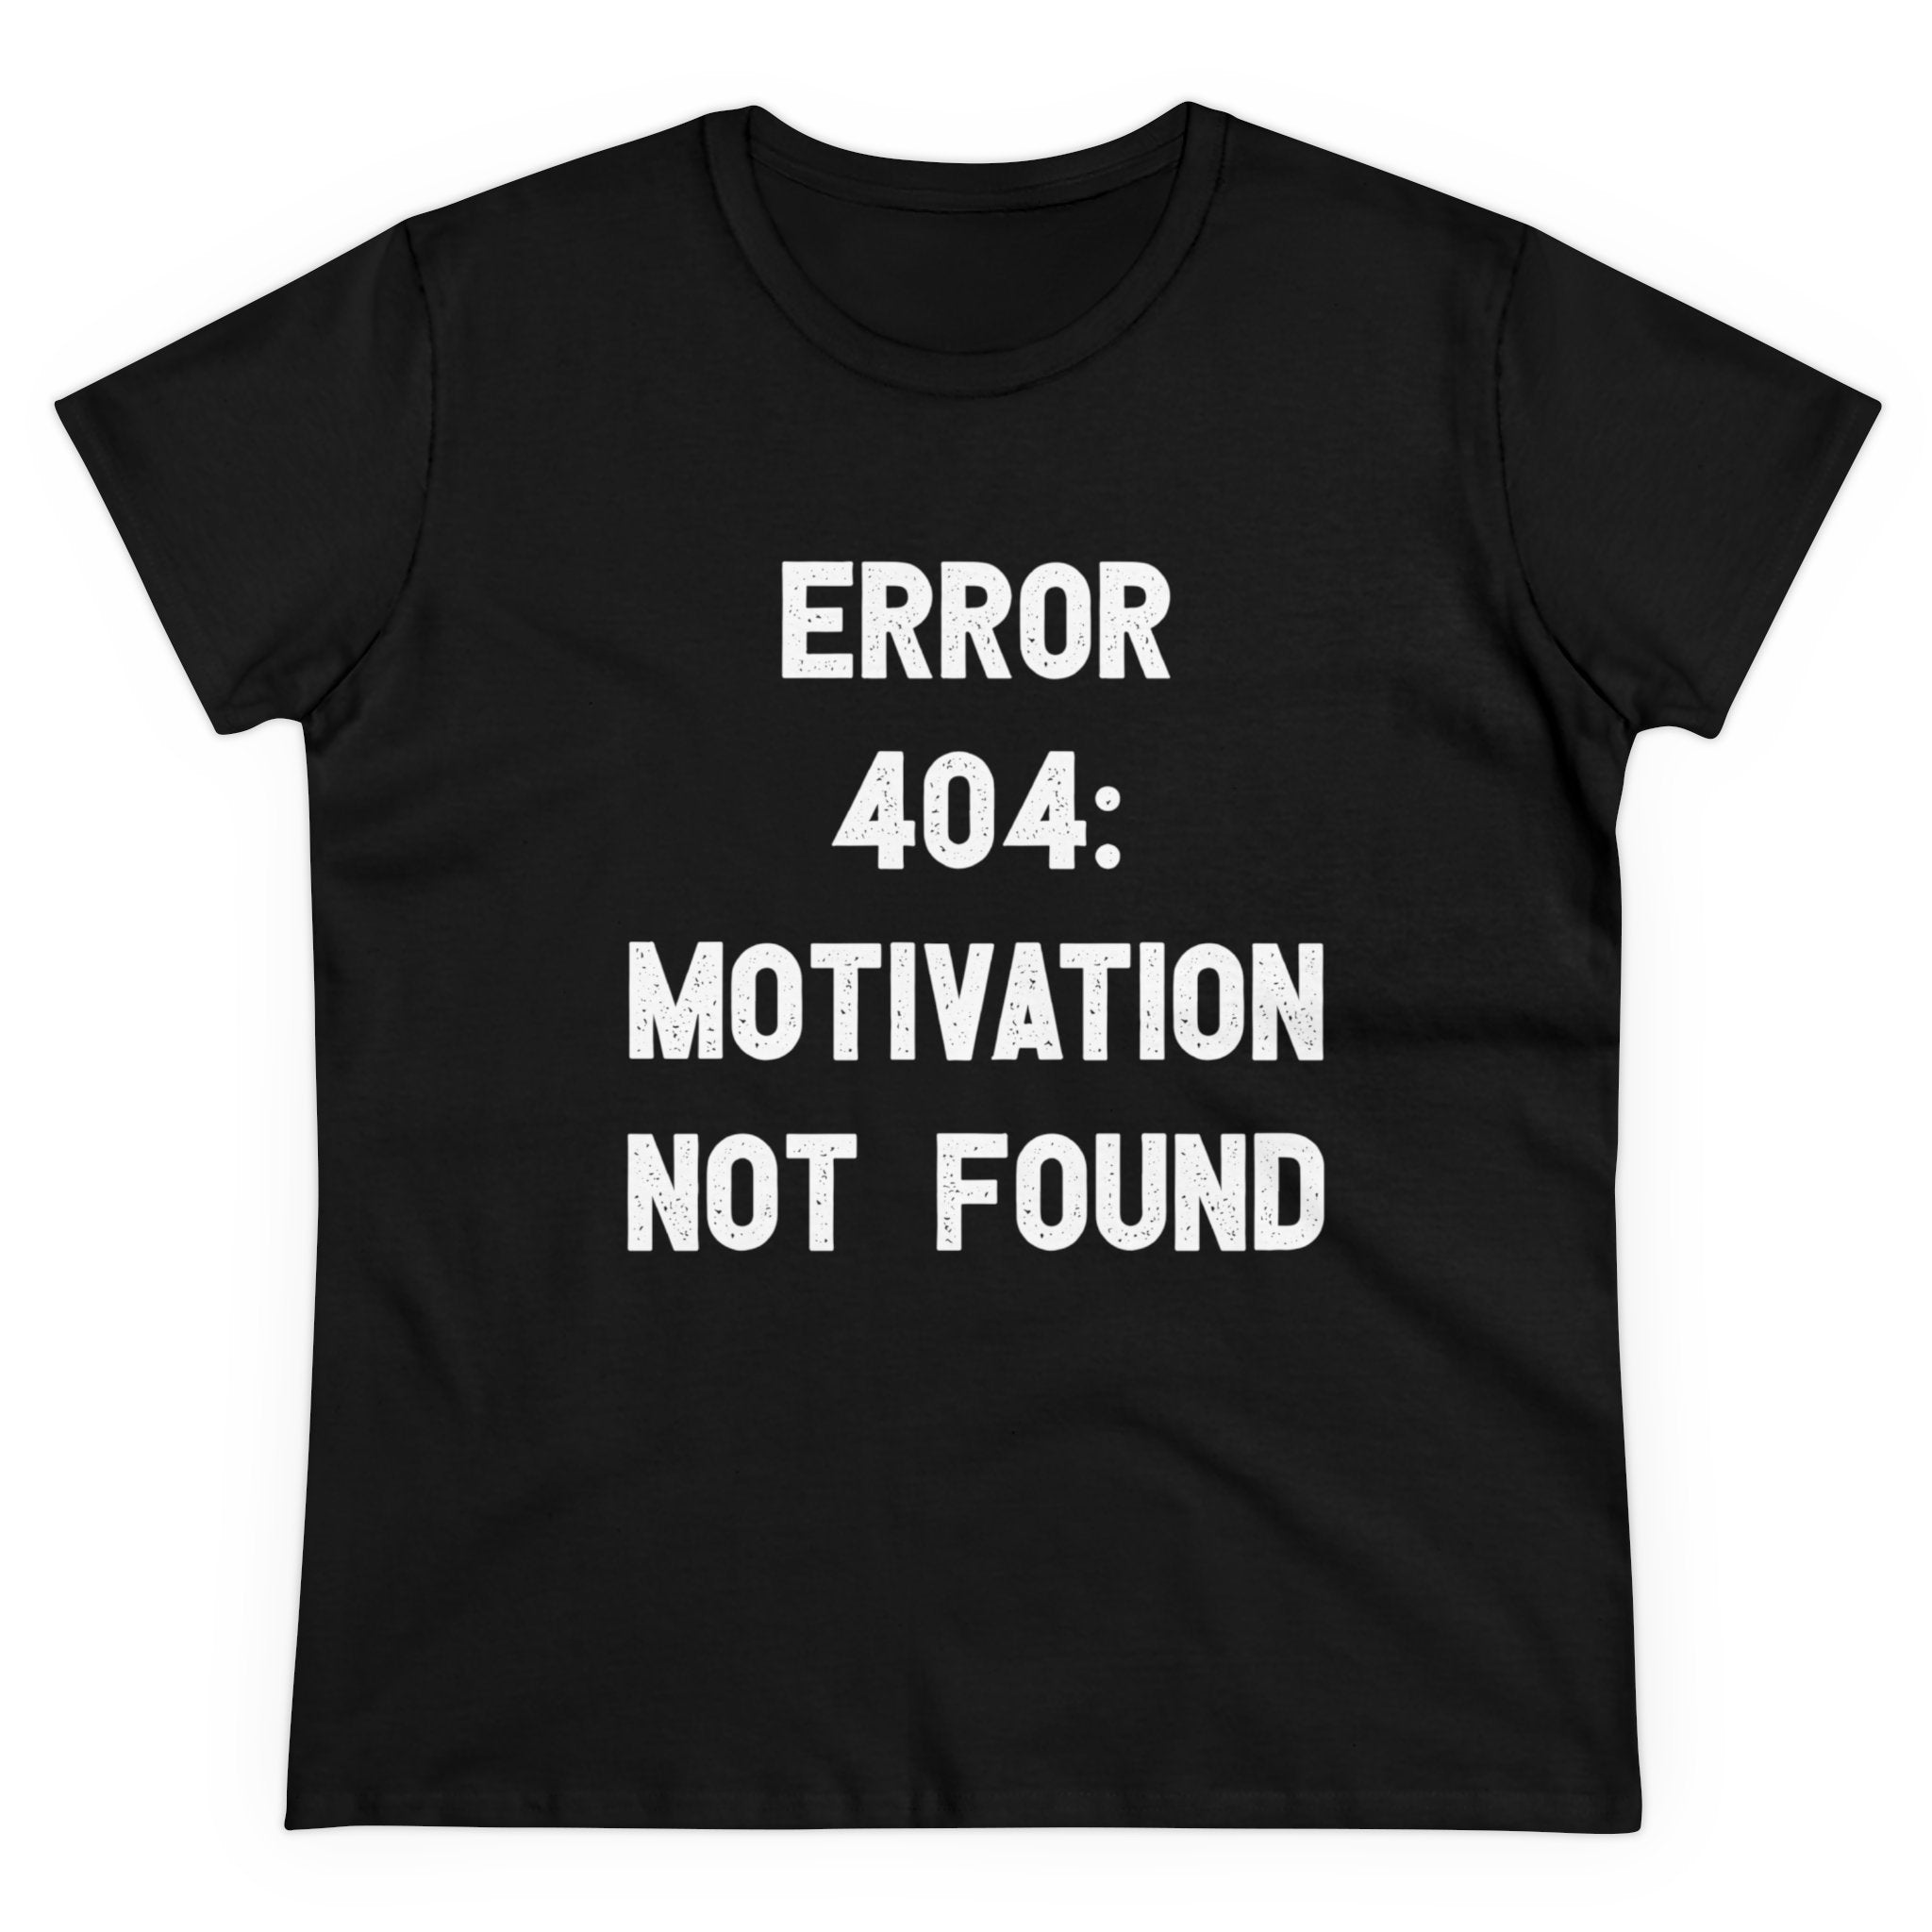 A black, semi-fitted silhouette T-shirt with white text that reads, "Error 404: Motivation not found - Women's Tee.